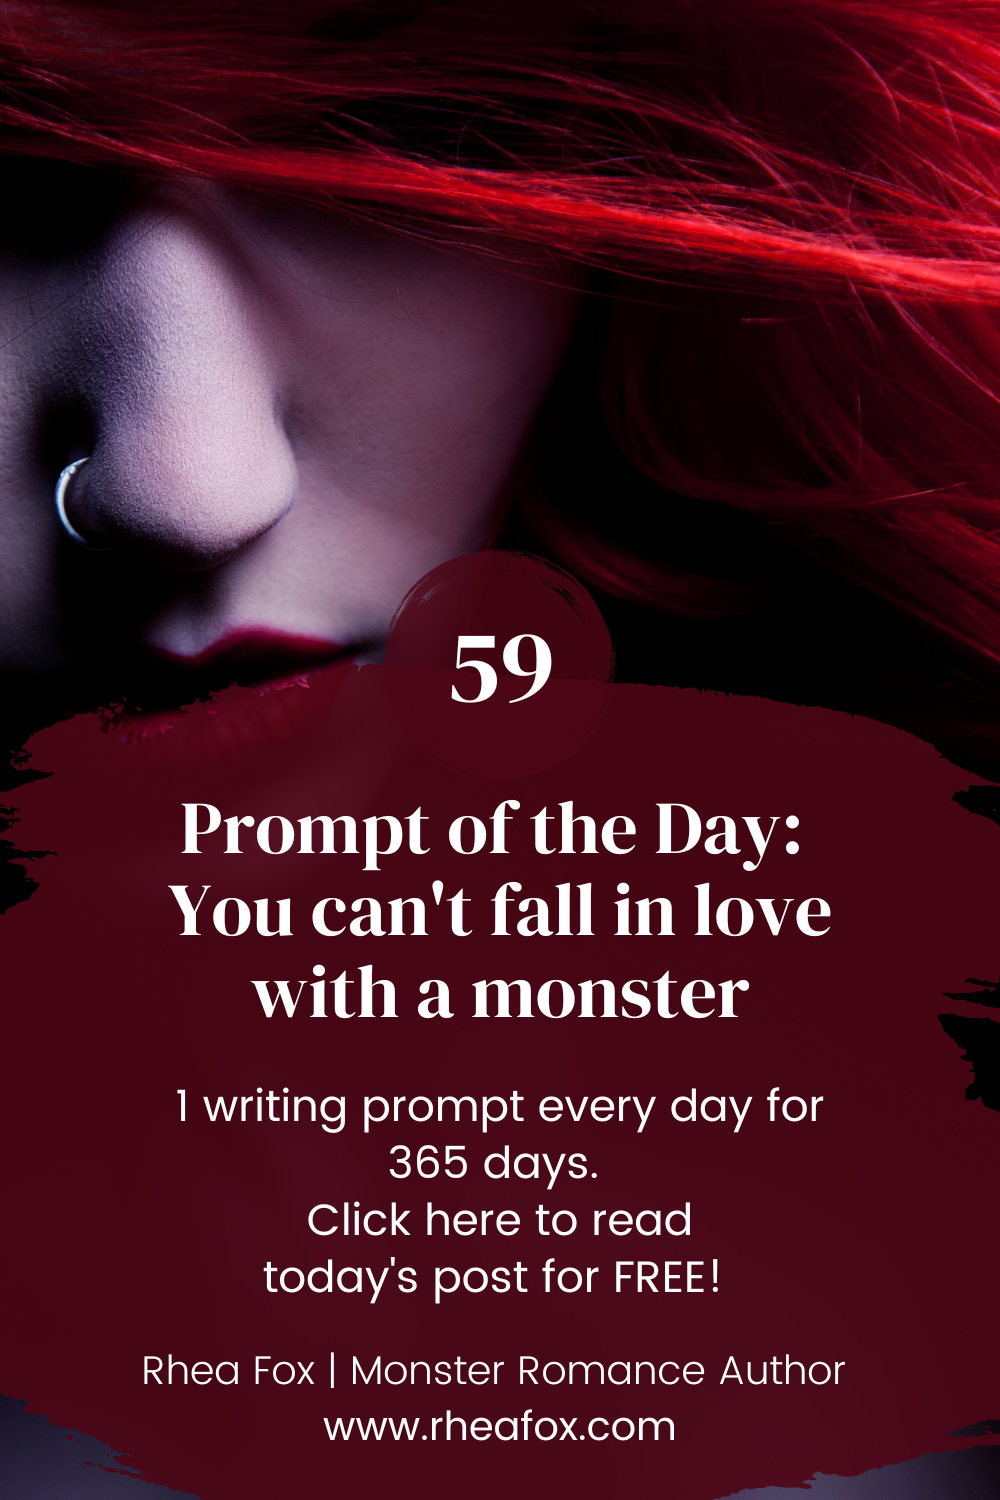 Day 59 - You can't fall in love with a monster | #365promptproject | 1 writing prompt for every day of 2023: Read my texts now for free over on my blog! | Rhea Fox - Monster Romance Author